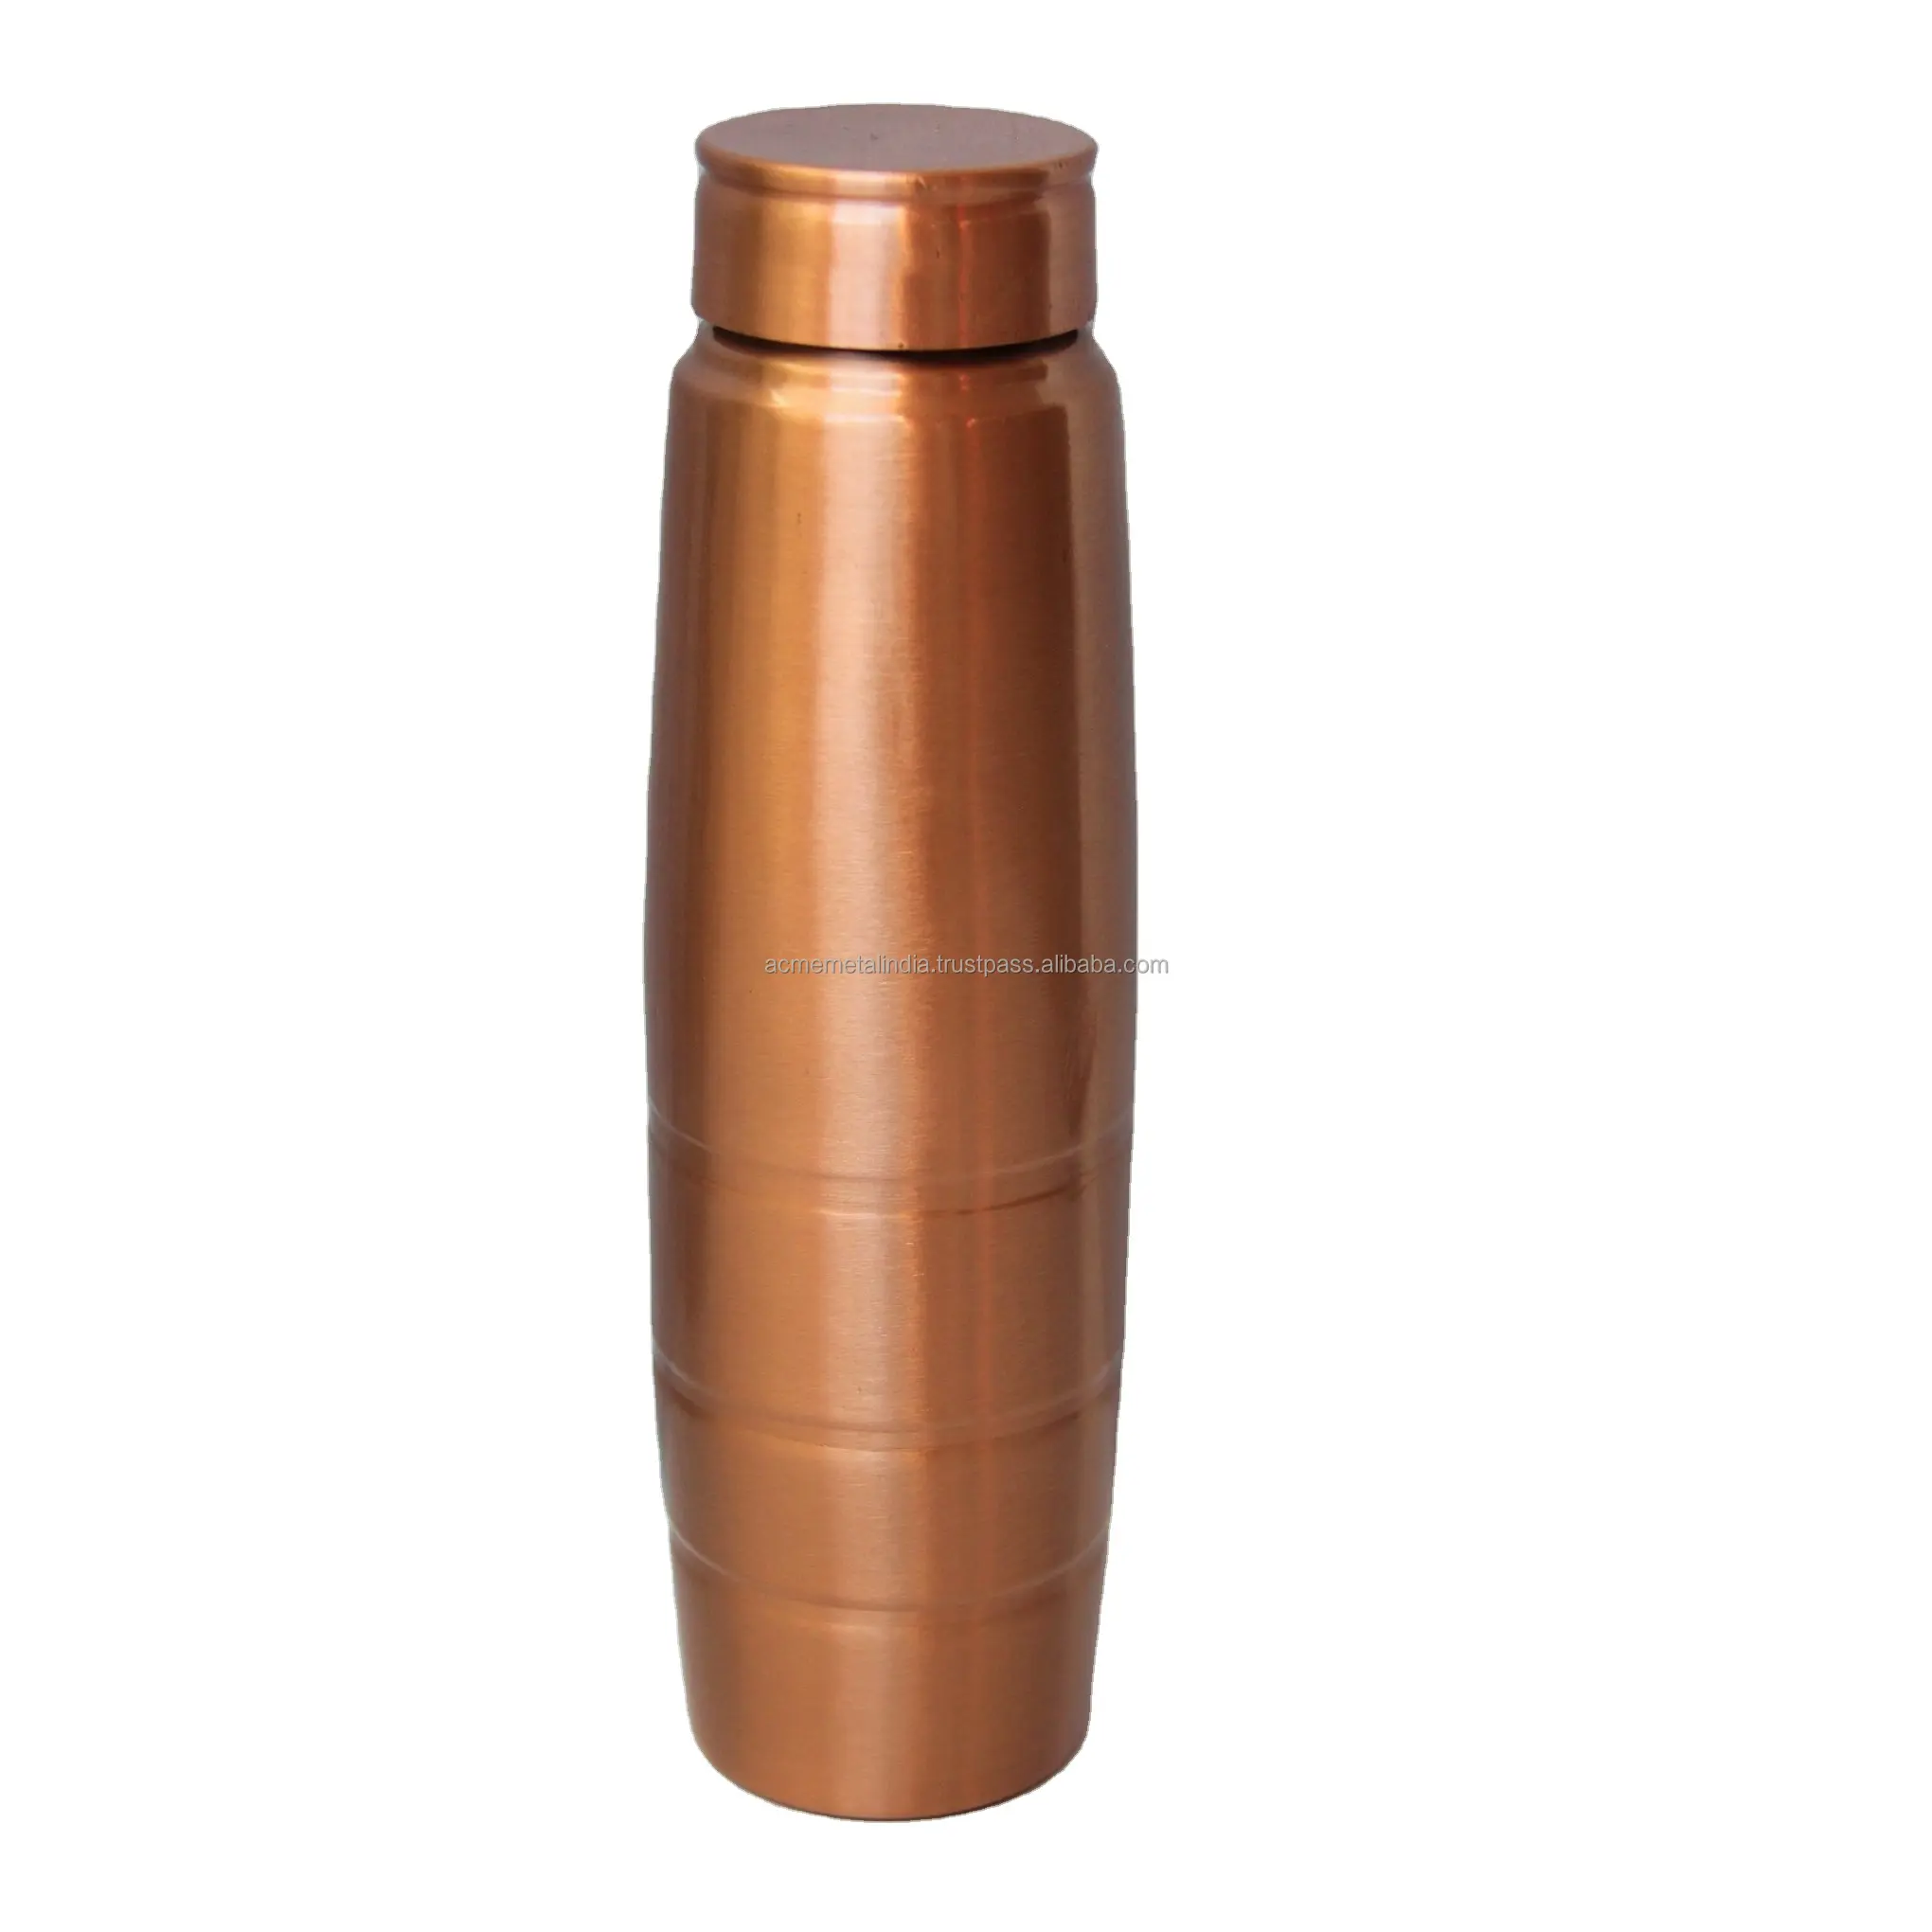 Water Bottle For Kitchen Pure Copper Royal Design Drink Ware 1000 ml Leak Proof Copper Bottles Made In India Reasonable Price